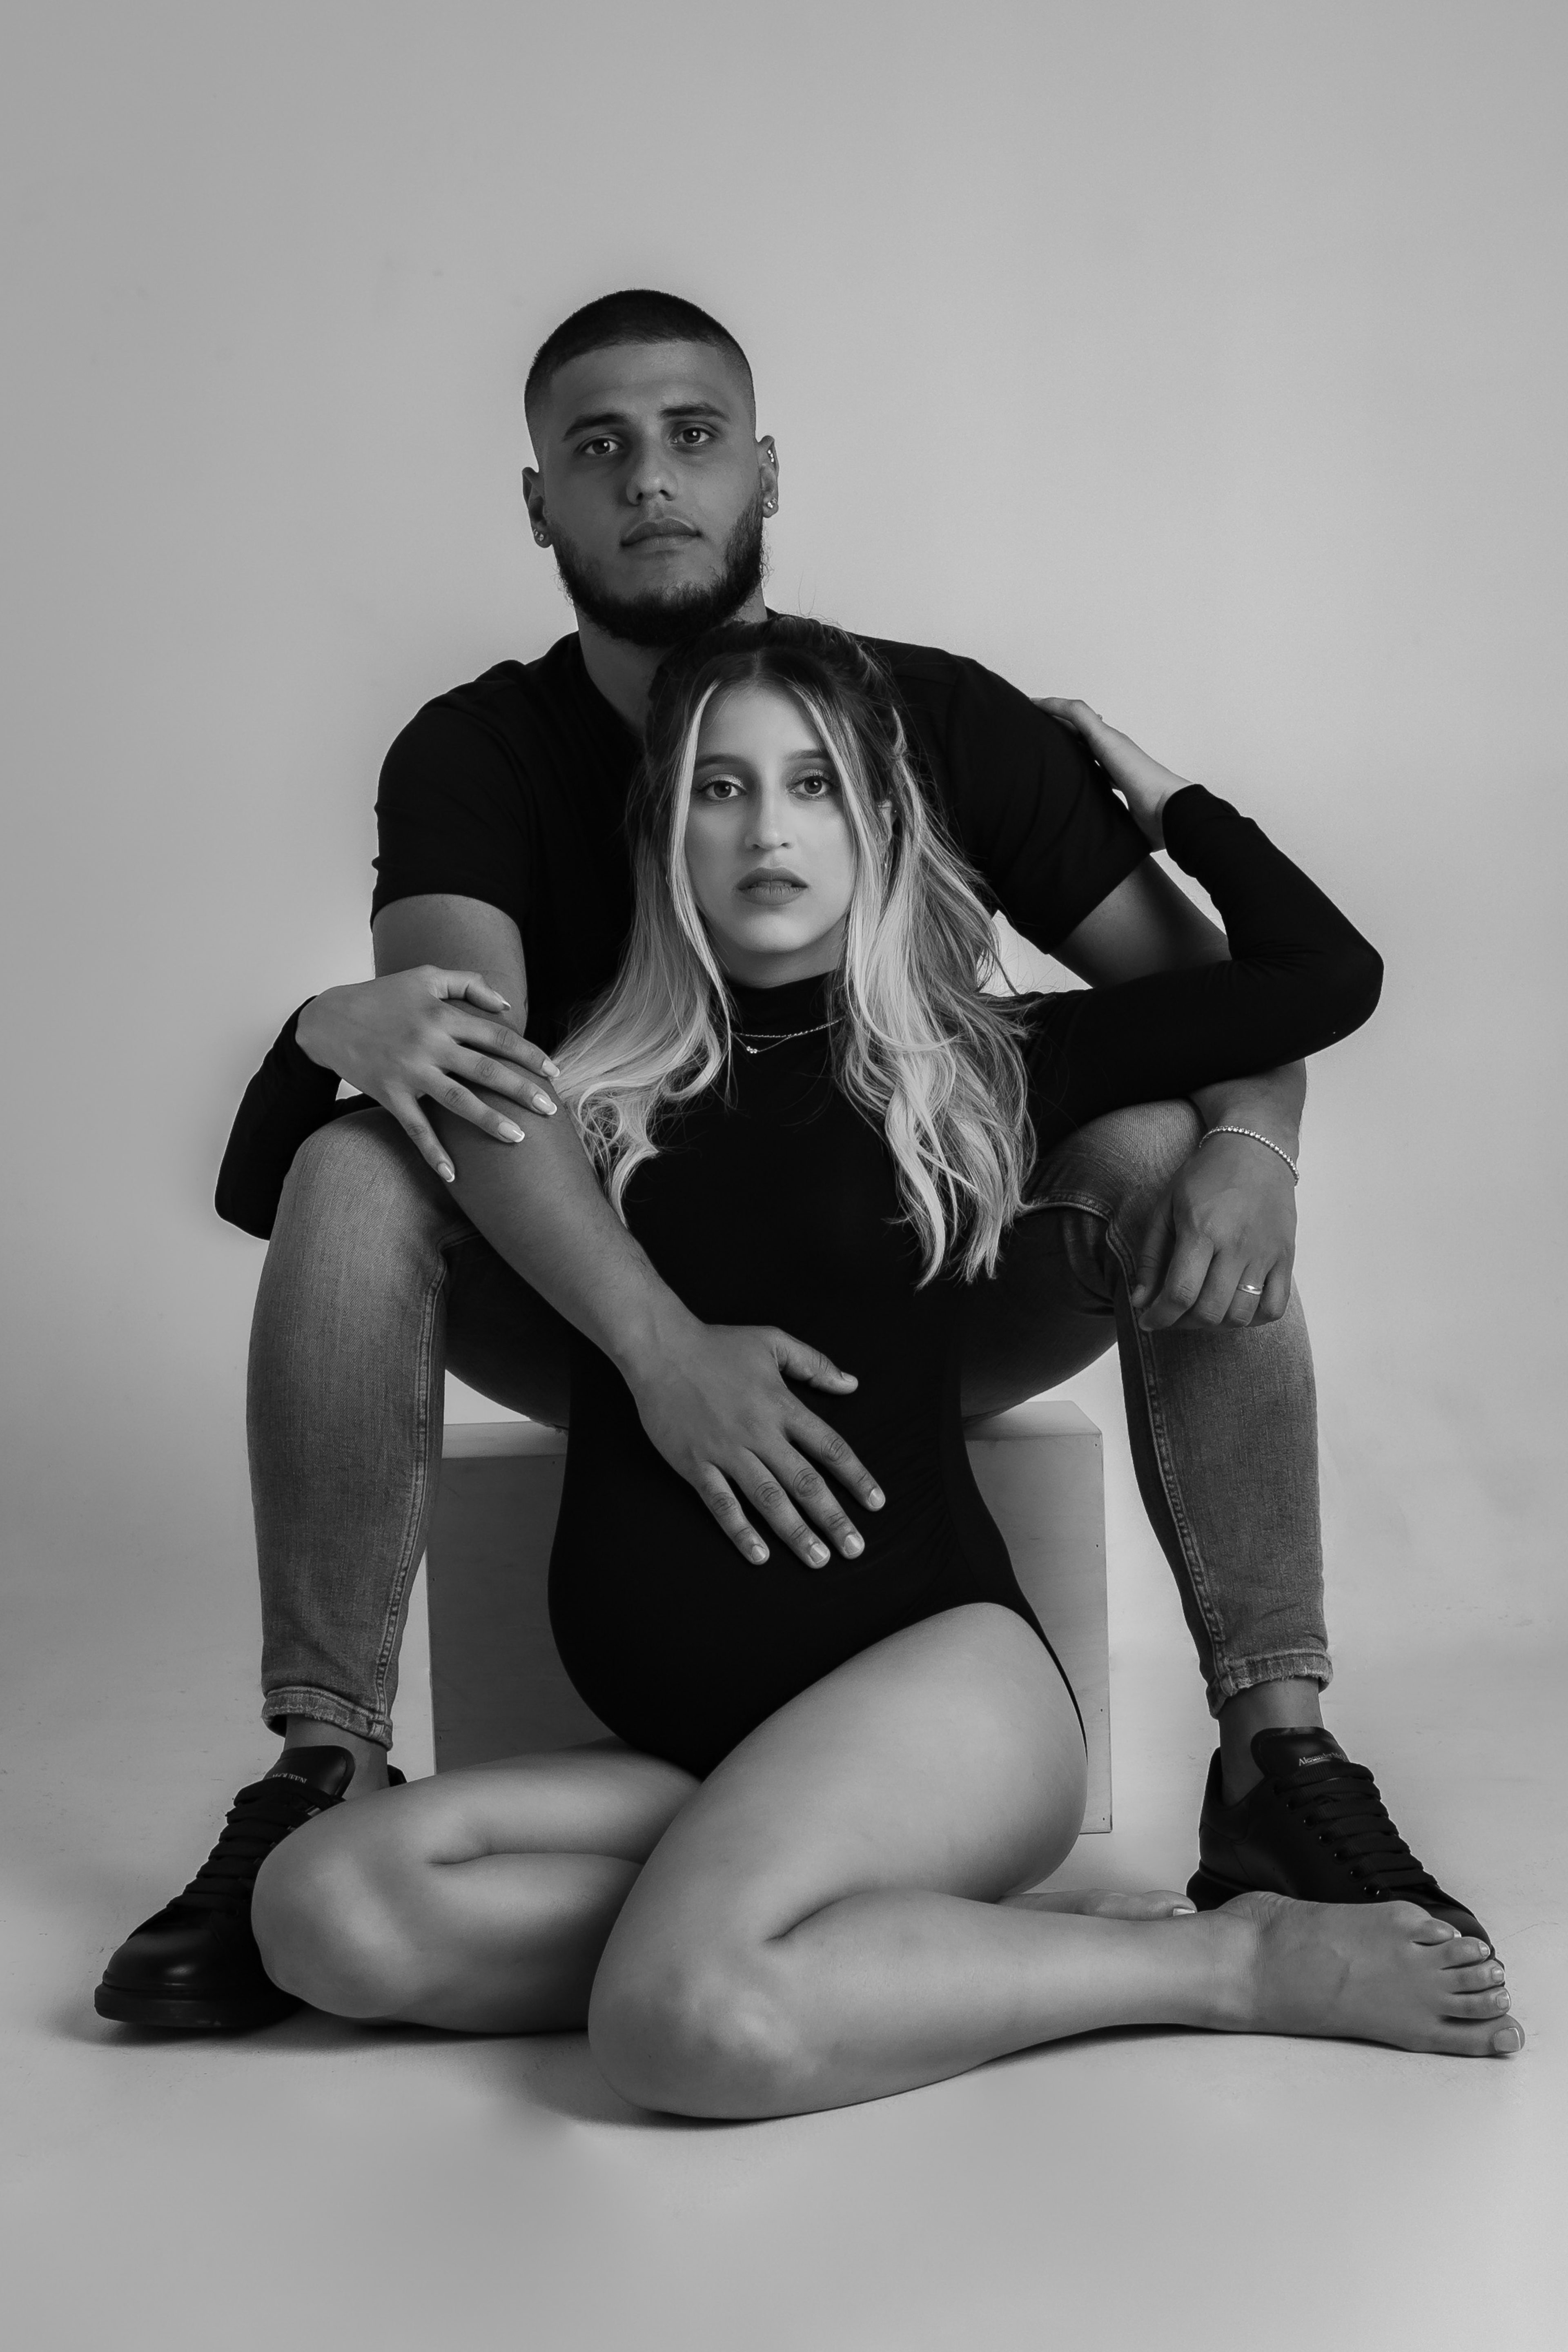 A black and white maternity photoshoot with a man and a woman.